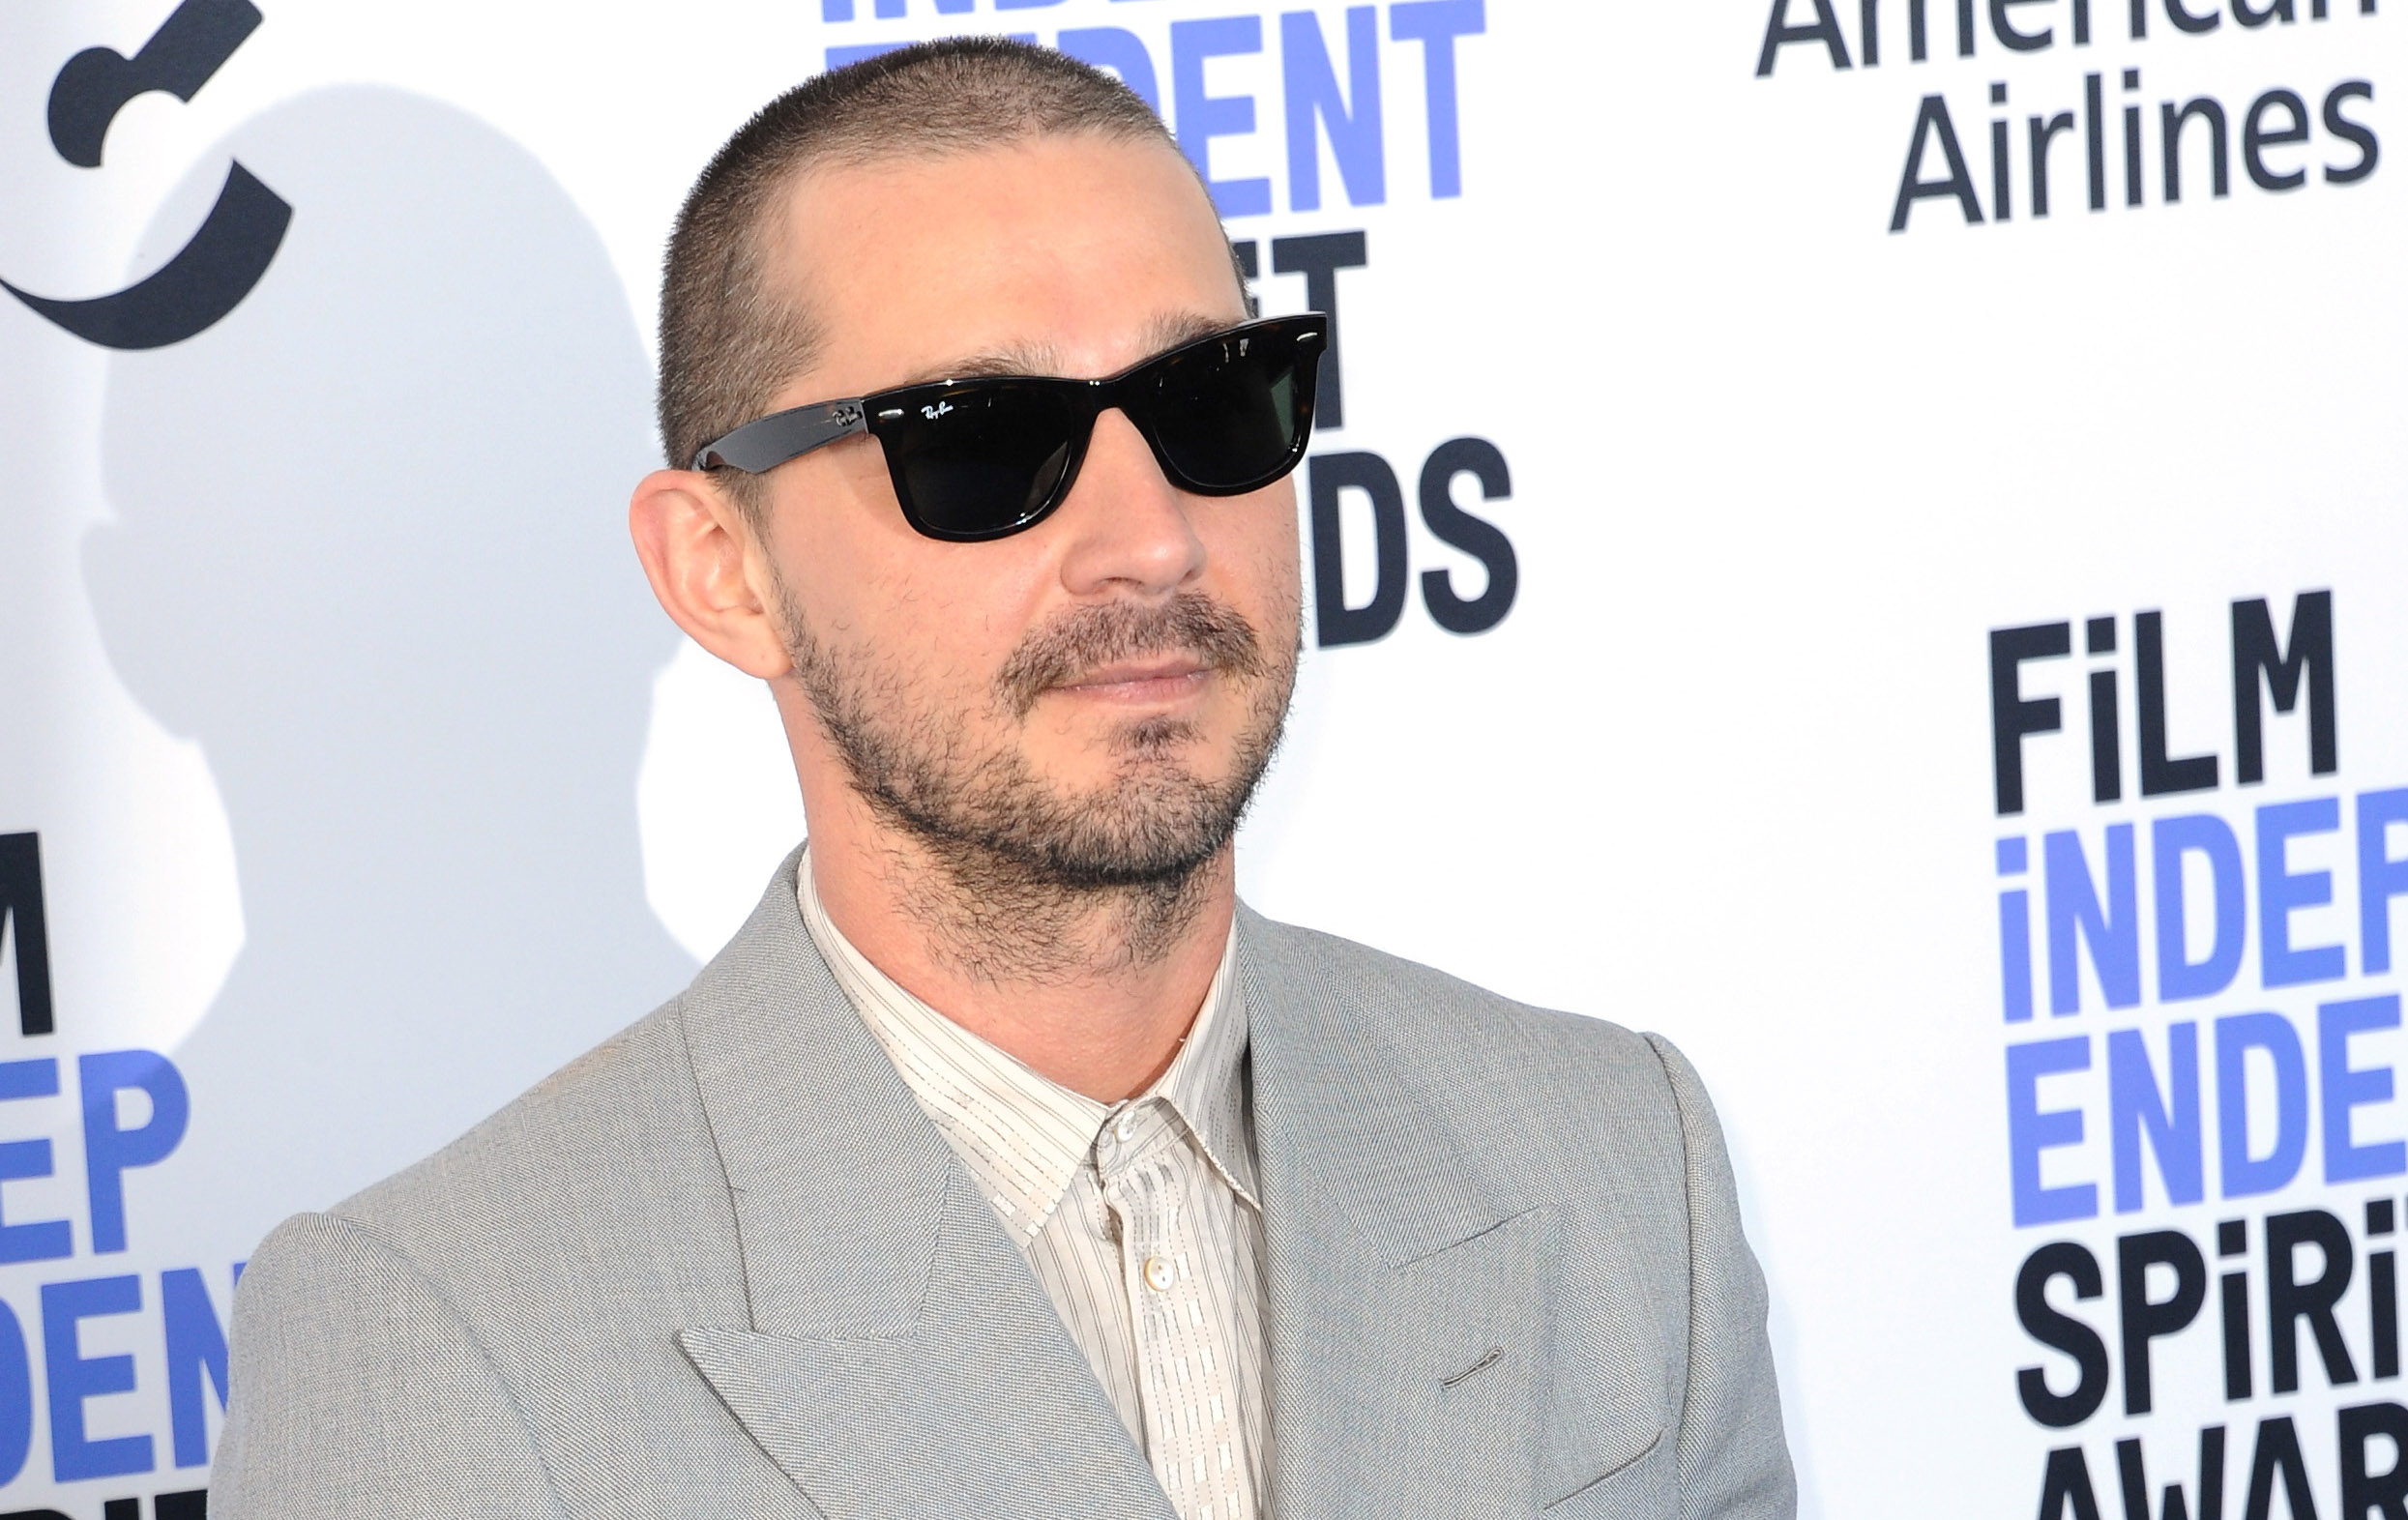 Shia LaBeouf Goes for a Shirtless Jog Puts All His Tattoos on Display  Photo 4476457  Shia LaBeouf Shirtless Photos  Just Jared Entertainment  News